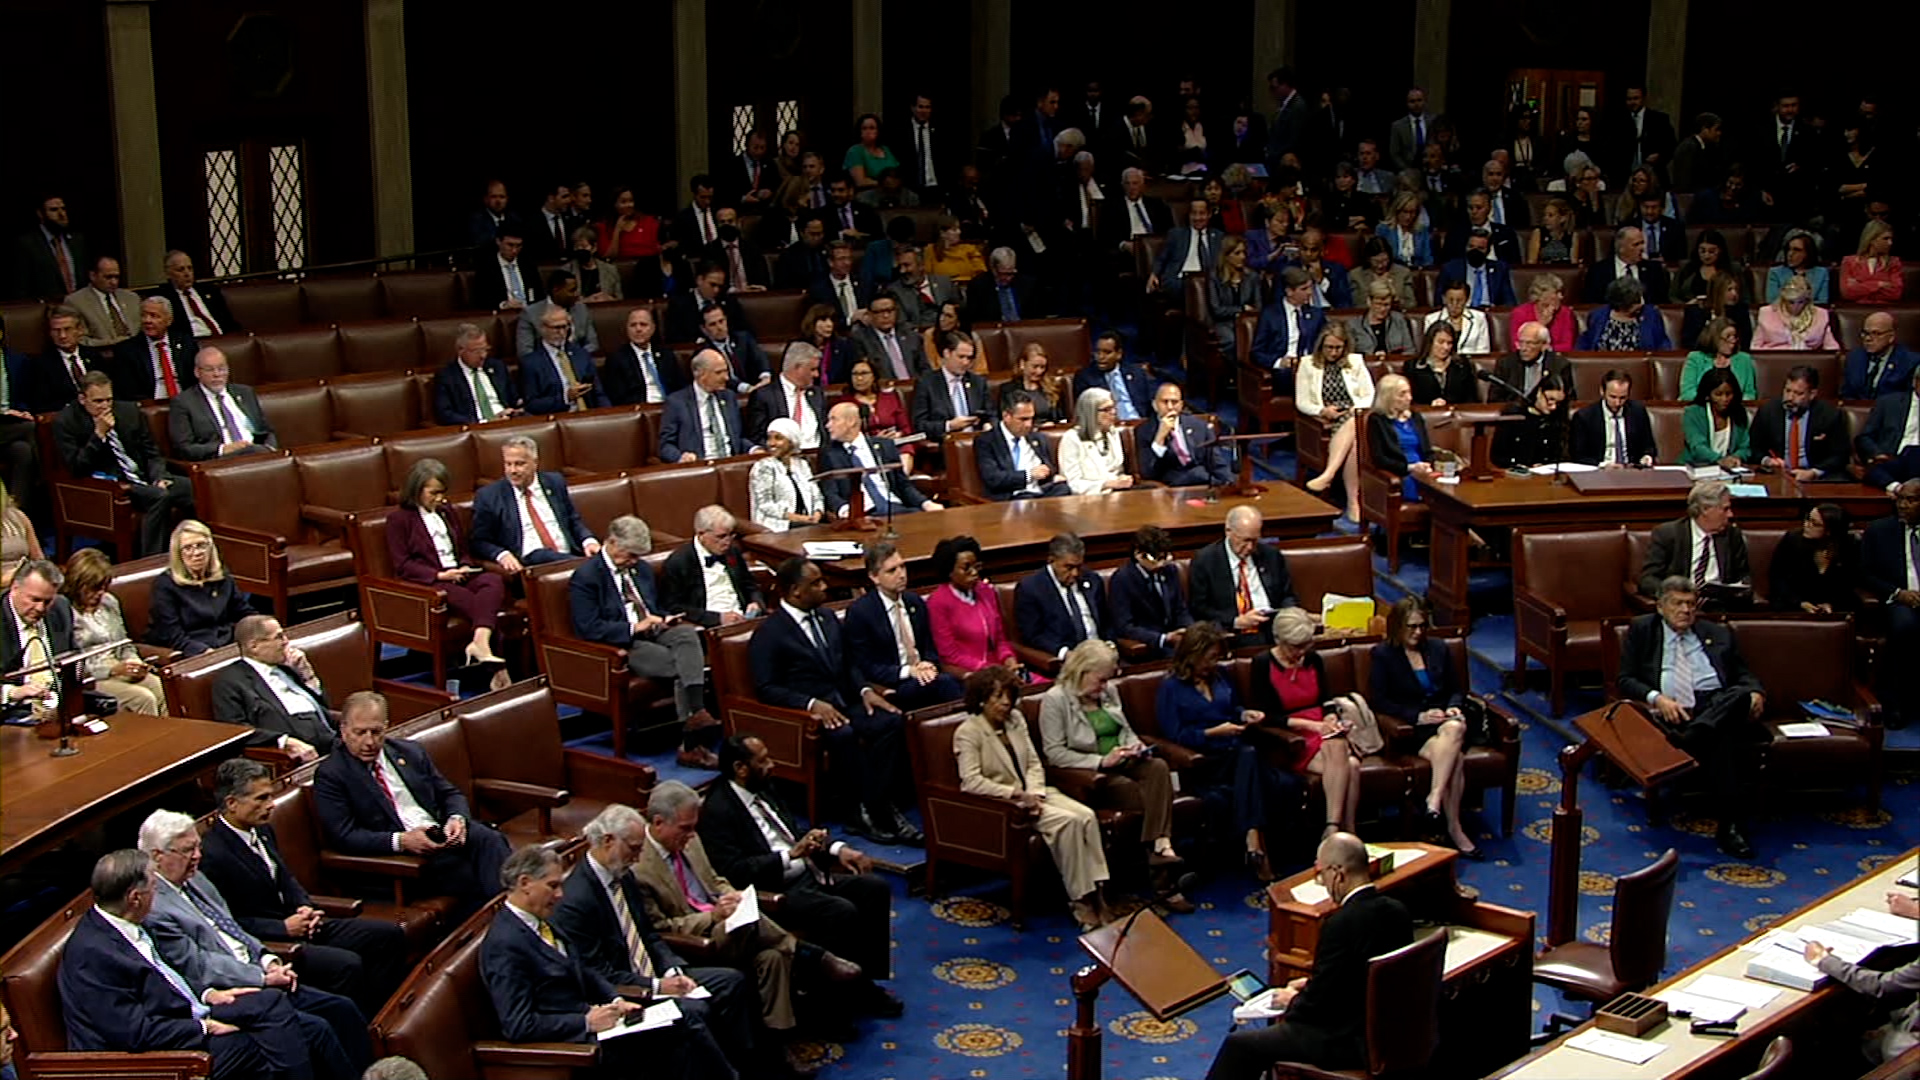 Members of the US House vote on the motion to vacate the speaker's chair.